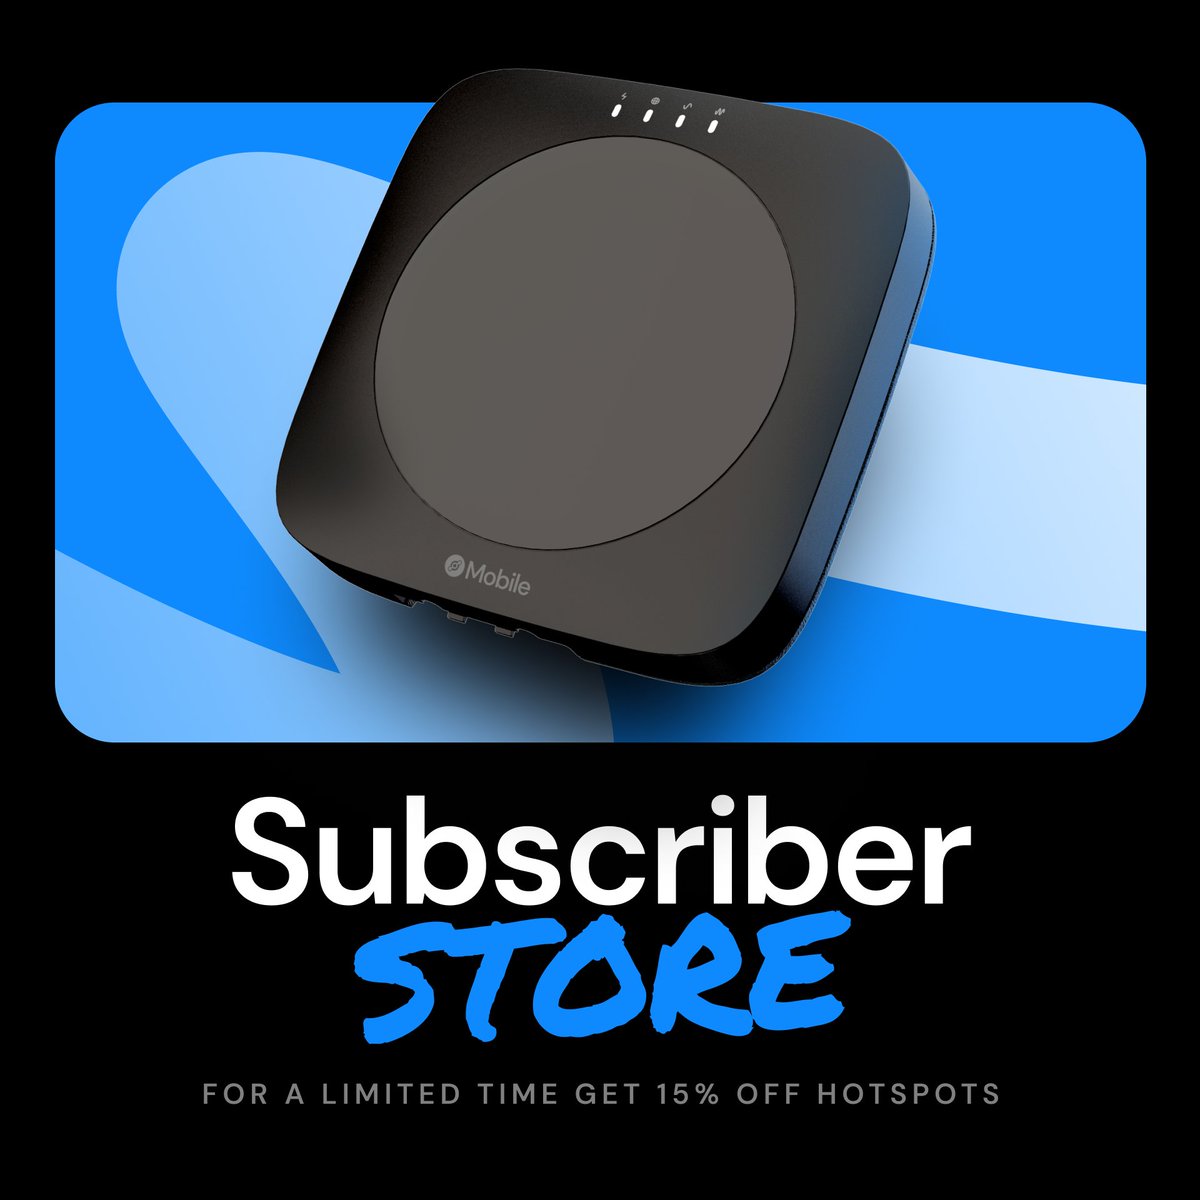 For a limited time, snag a Helium Mobile Hotspot for 15% off exclusively in our in-app Subscriber Store. Use your MOBILE rewards to boost your connectivity while saving!📶